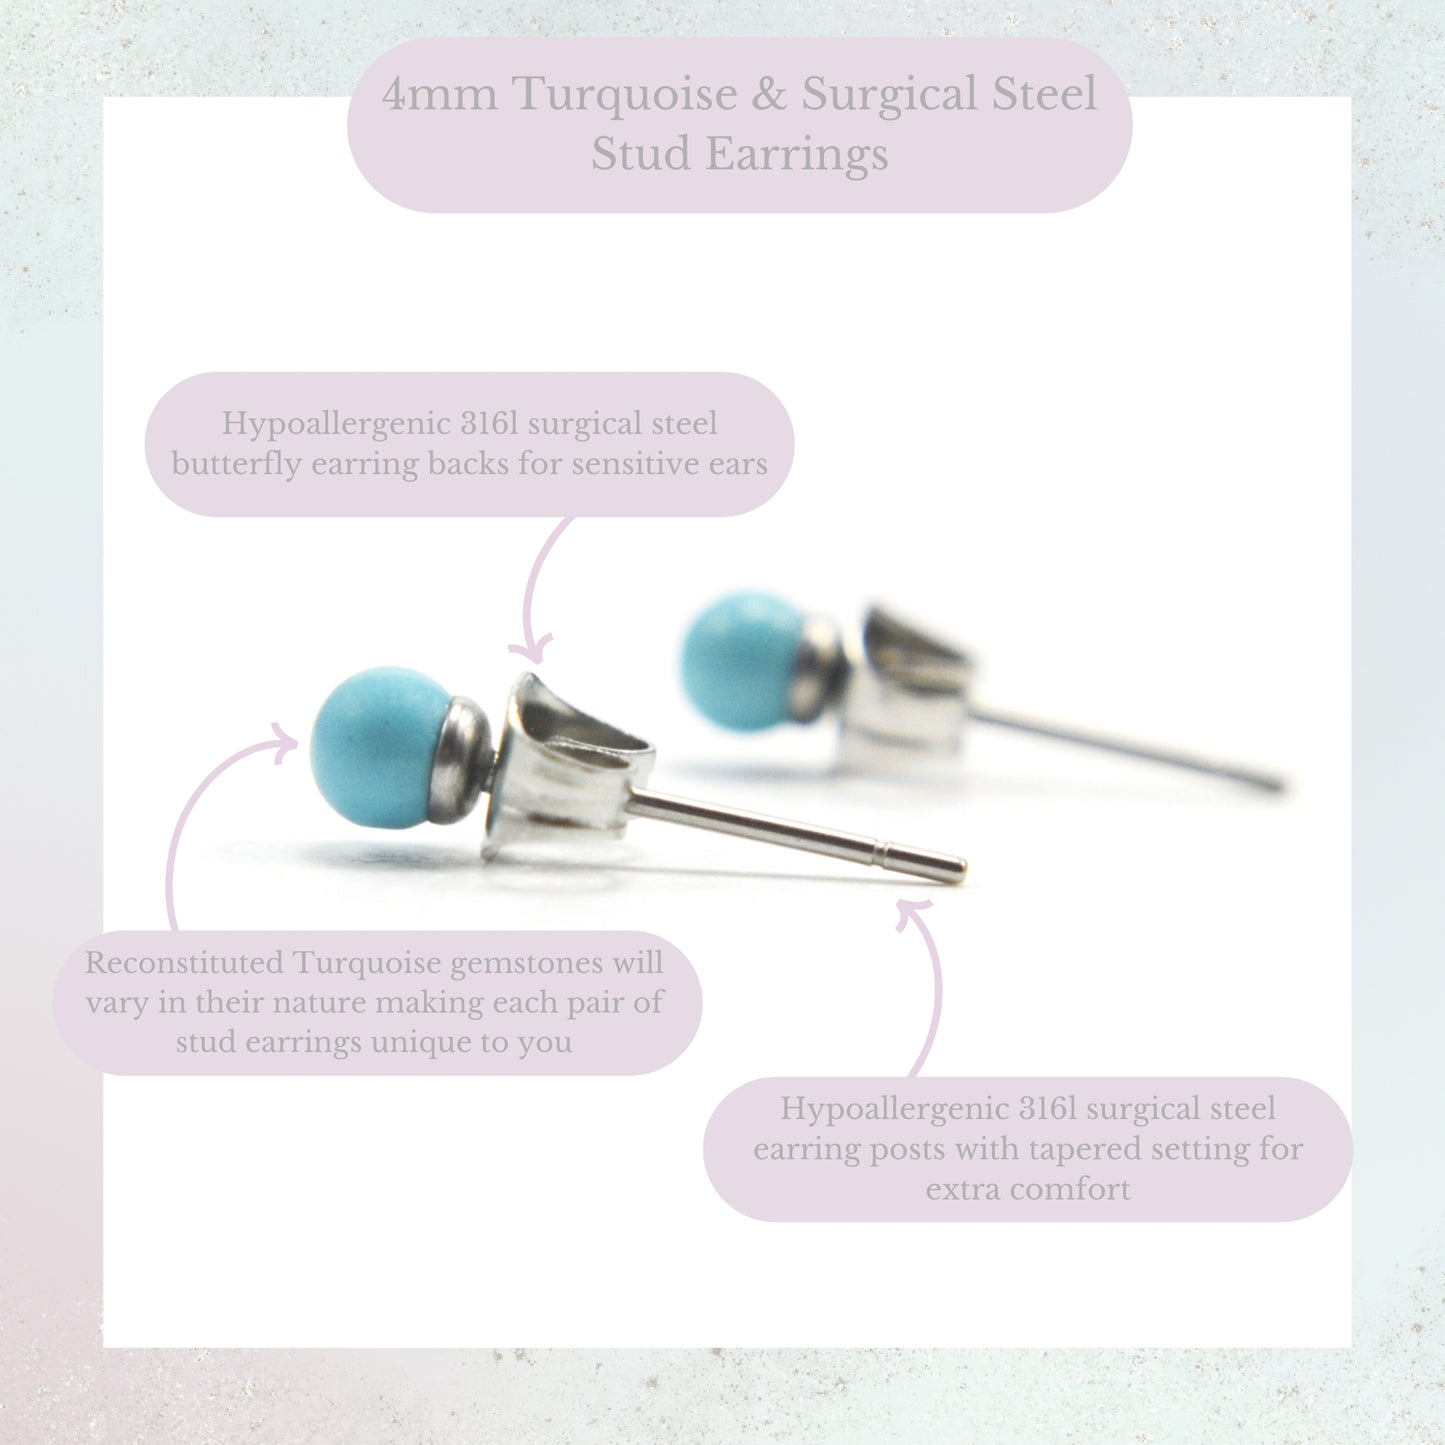 Product information graphic for 4mm Turquoise & surgical steel stud earrings